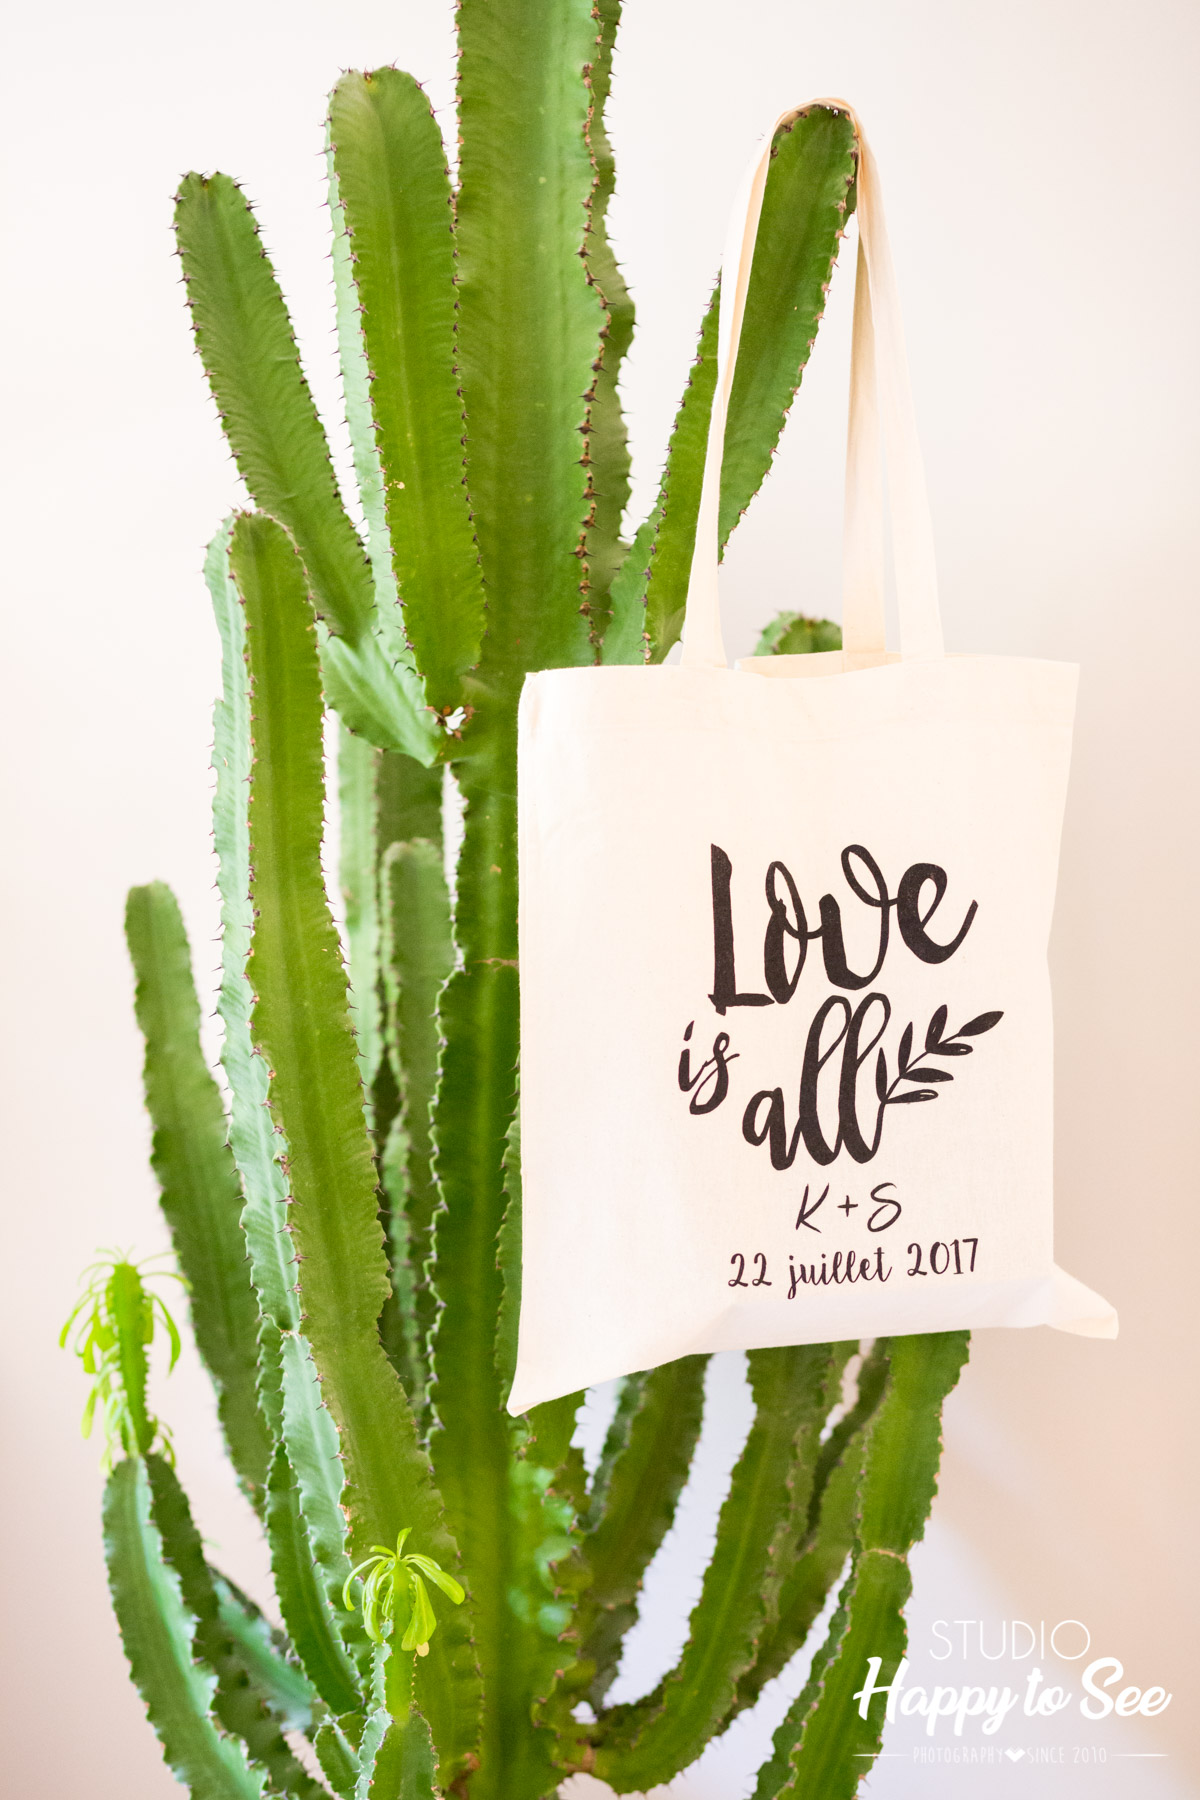 Mariage decoration cactus tote bag Love is all